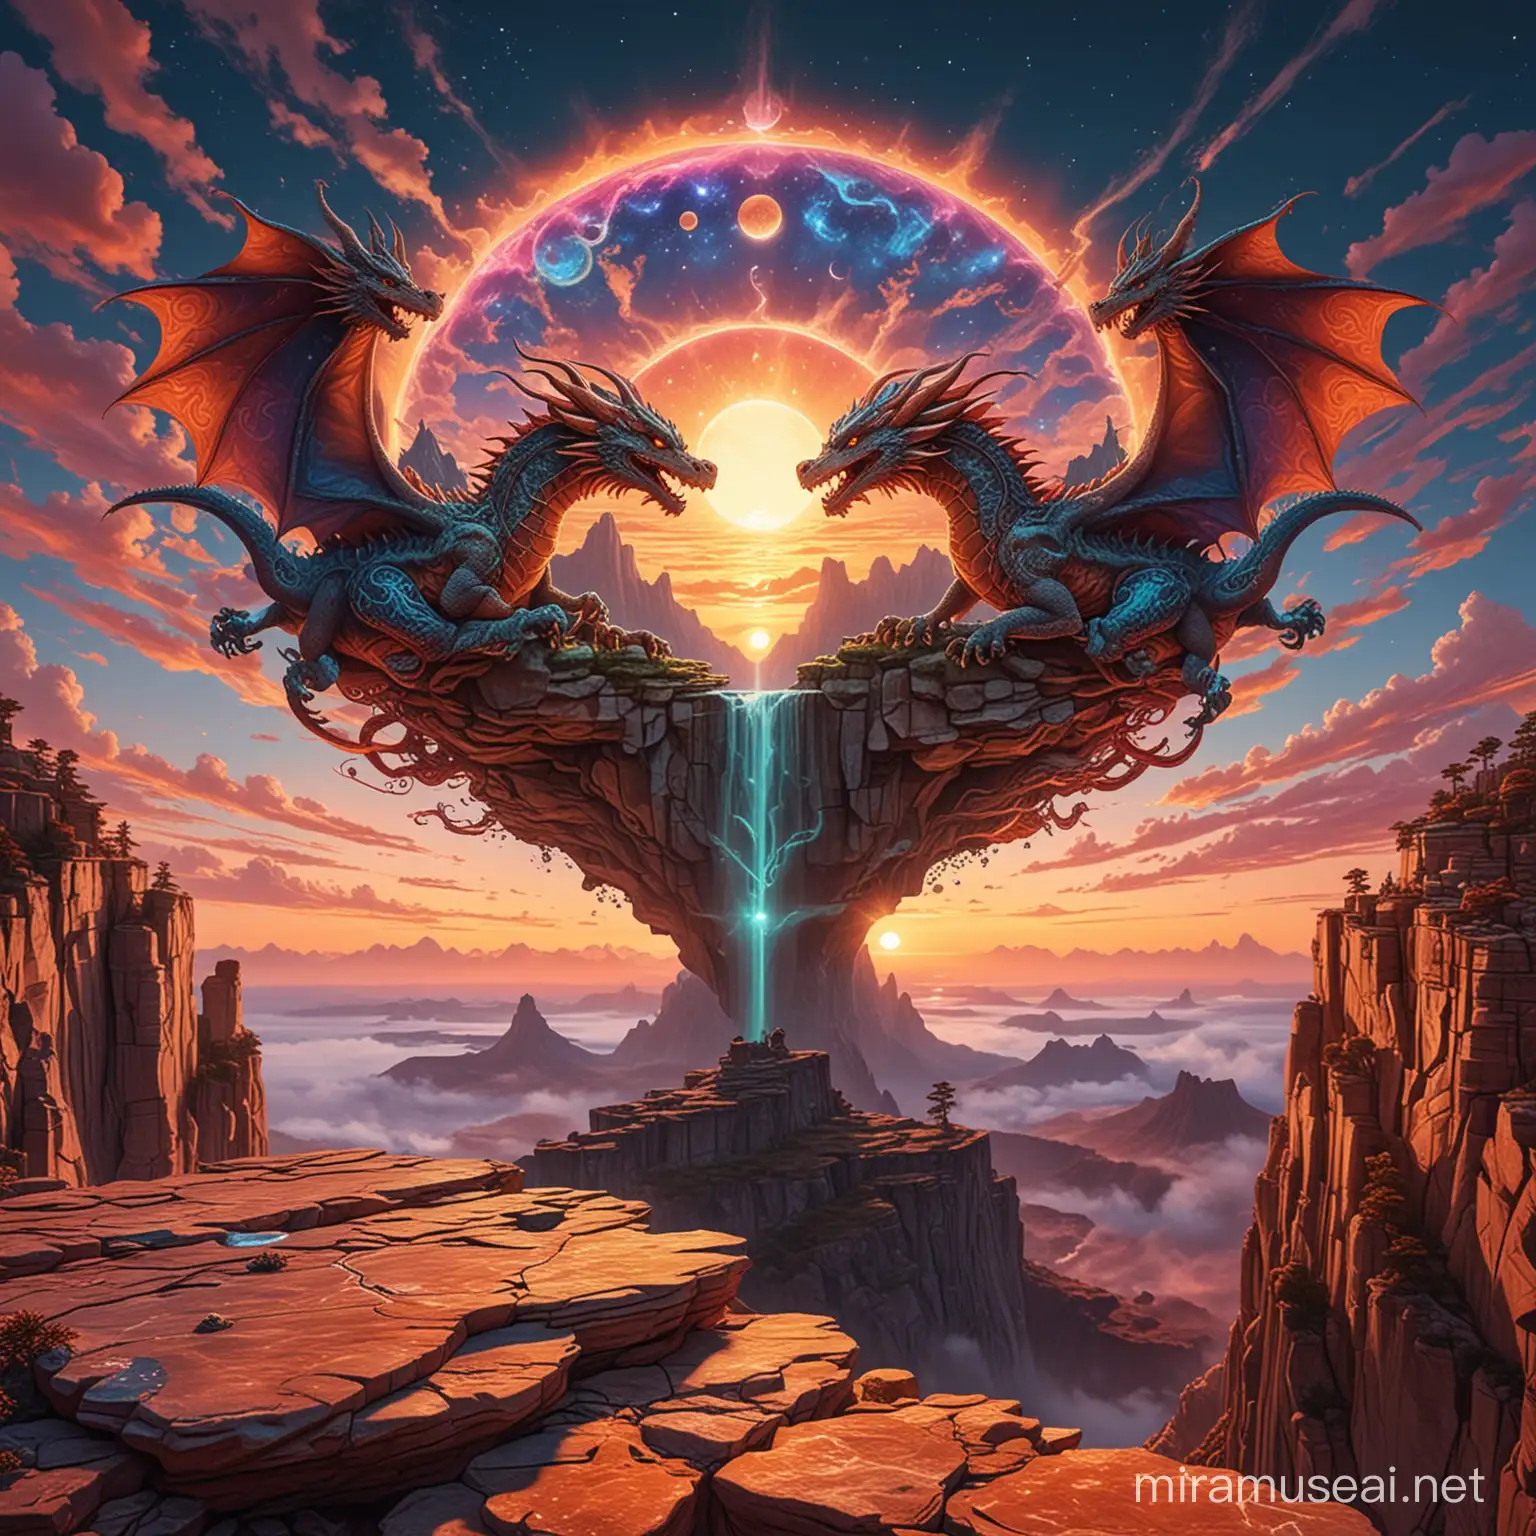 Psychedelic DMT visual on top of a scenic cliff on the edge of the universe at sunset with both the sun and moon visible. The clouds are shaped like dragons